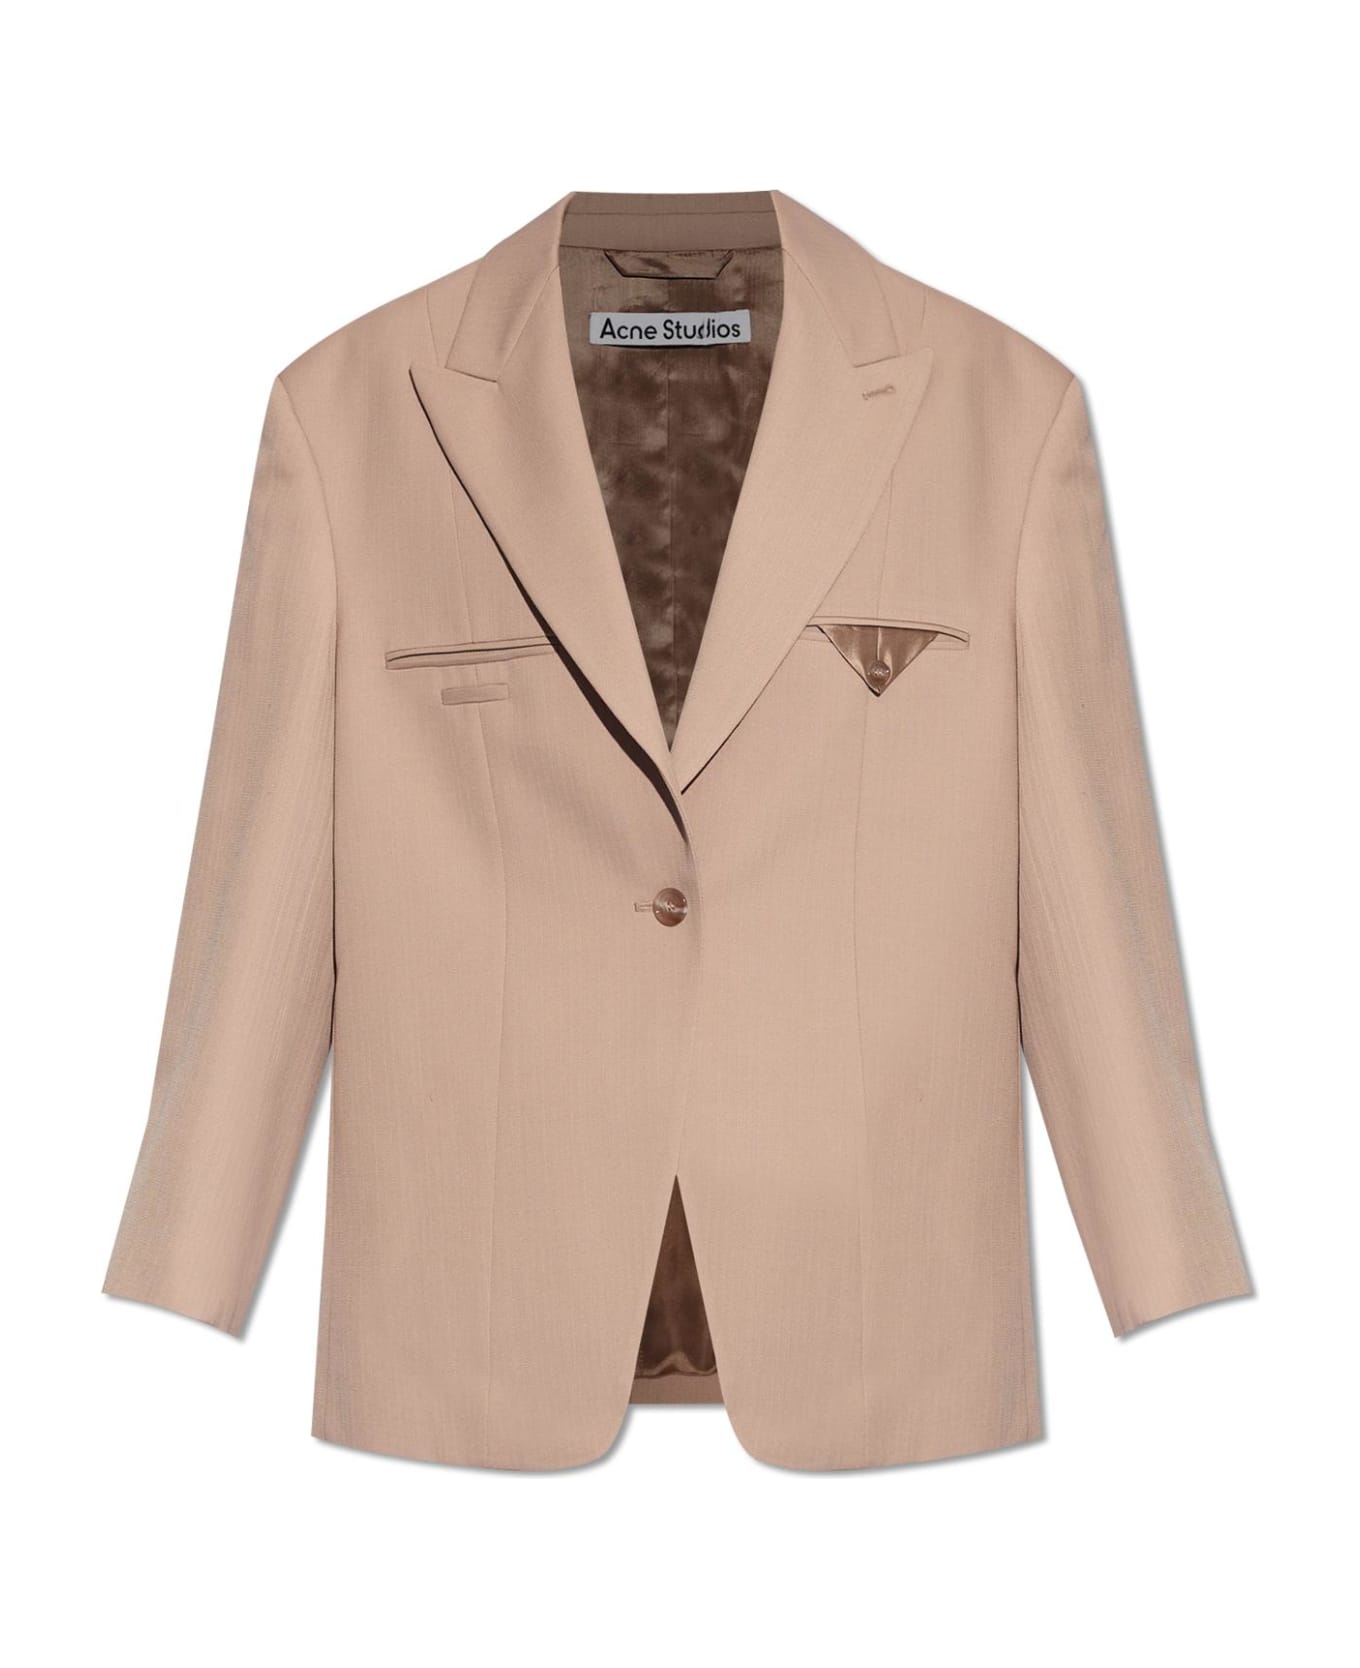 Acne Studios Tailored Single-breasted Jacket - COLD BEIGE